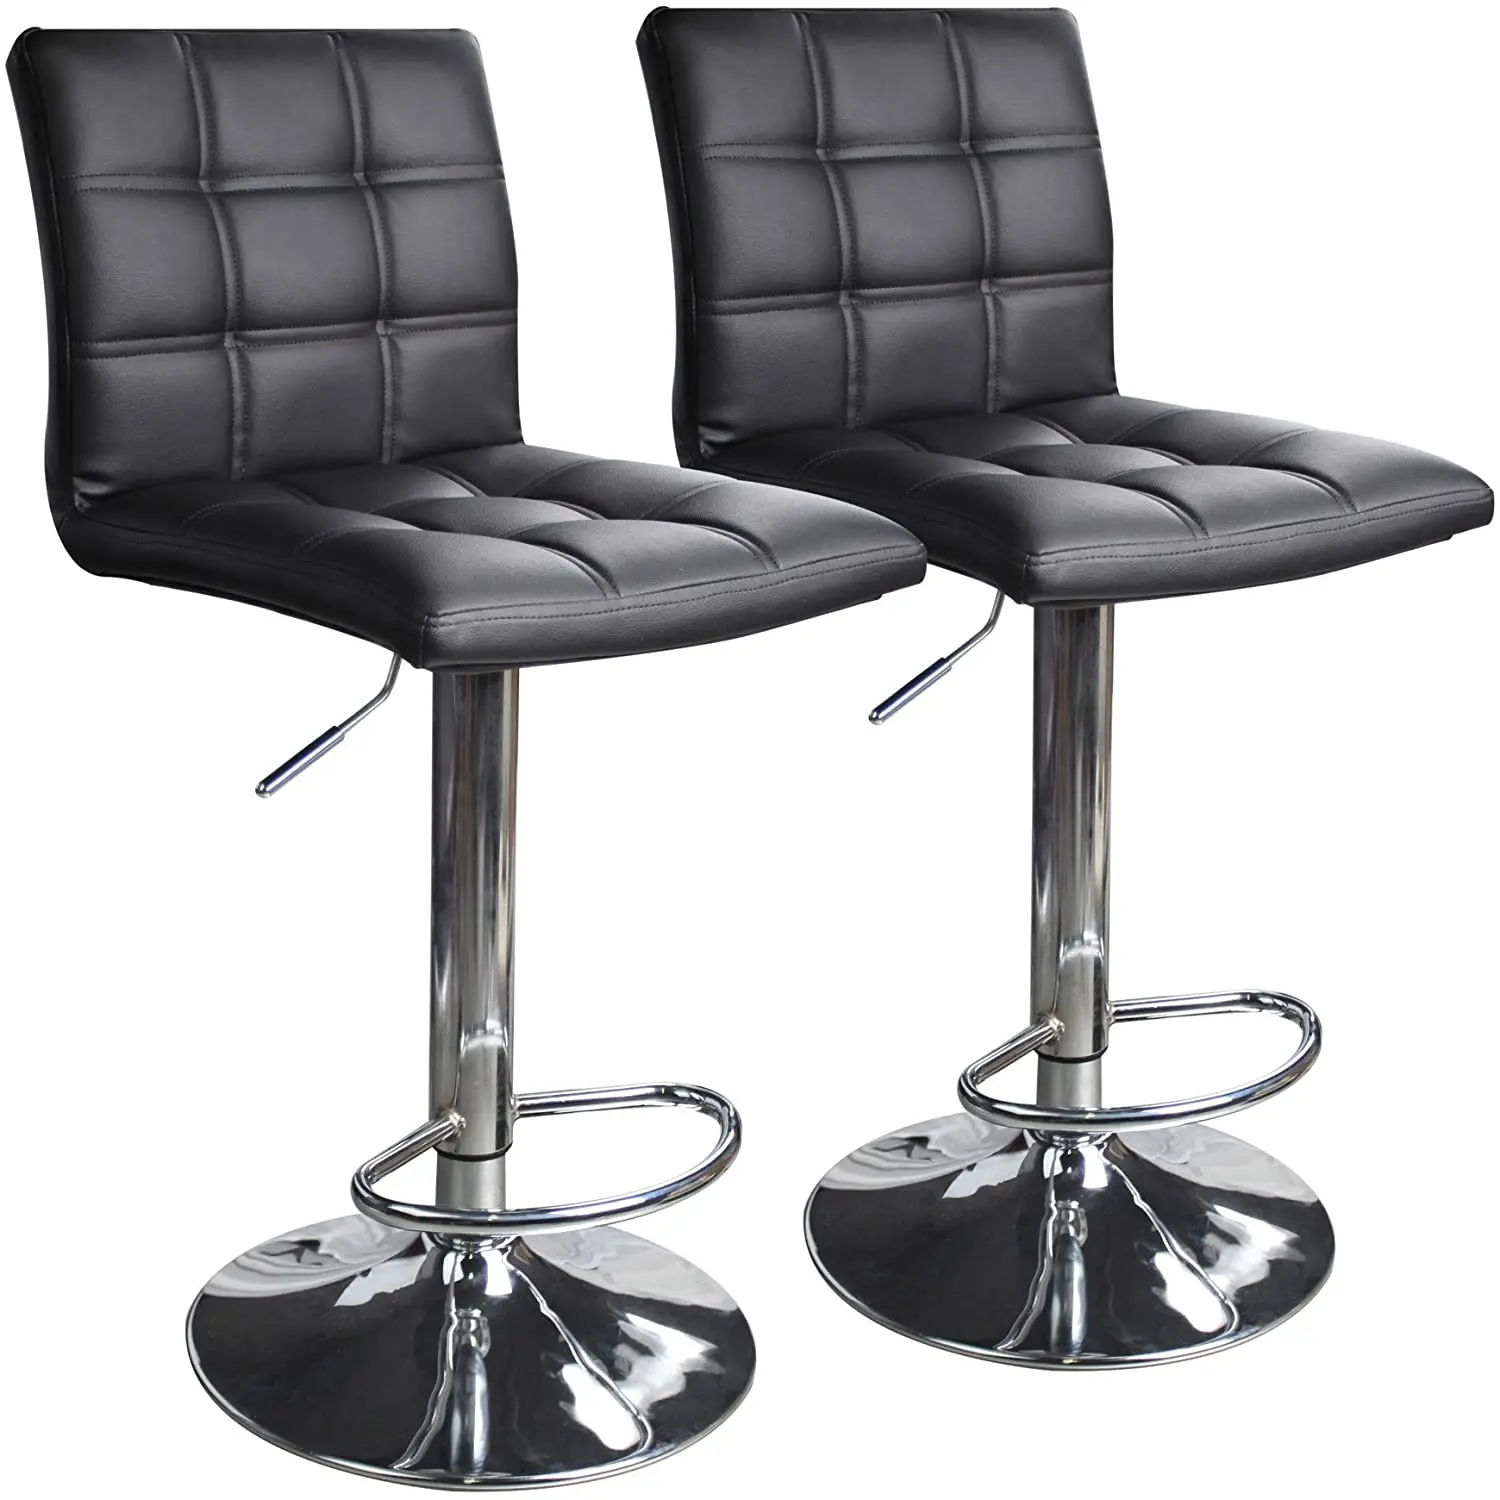 Set of 2 Counter Height PU Leather Bar Stools Adjustable Swivel Pub Chairs Black